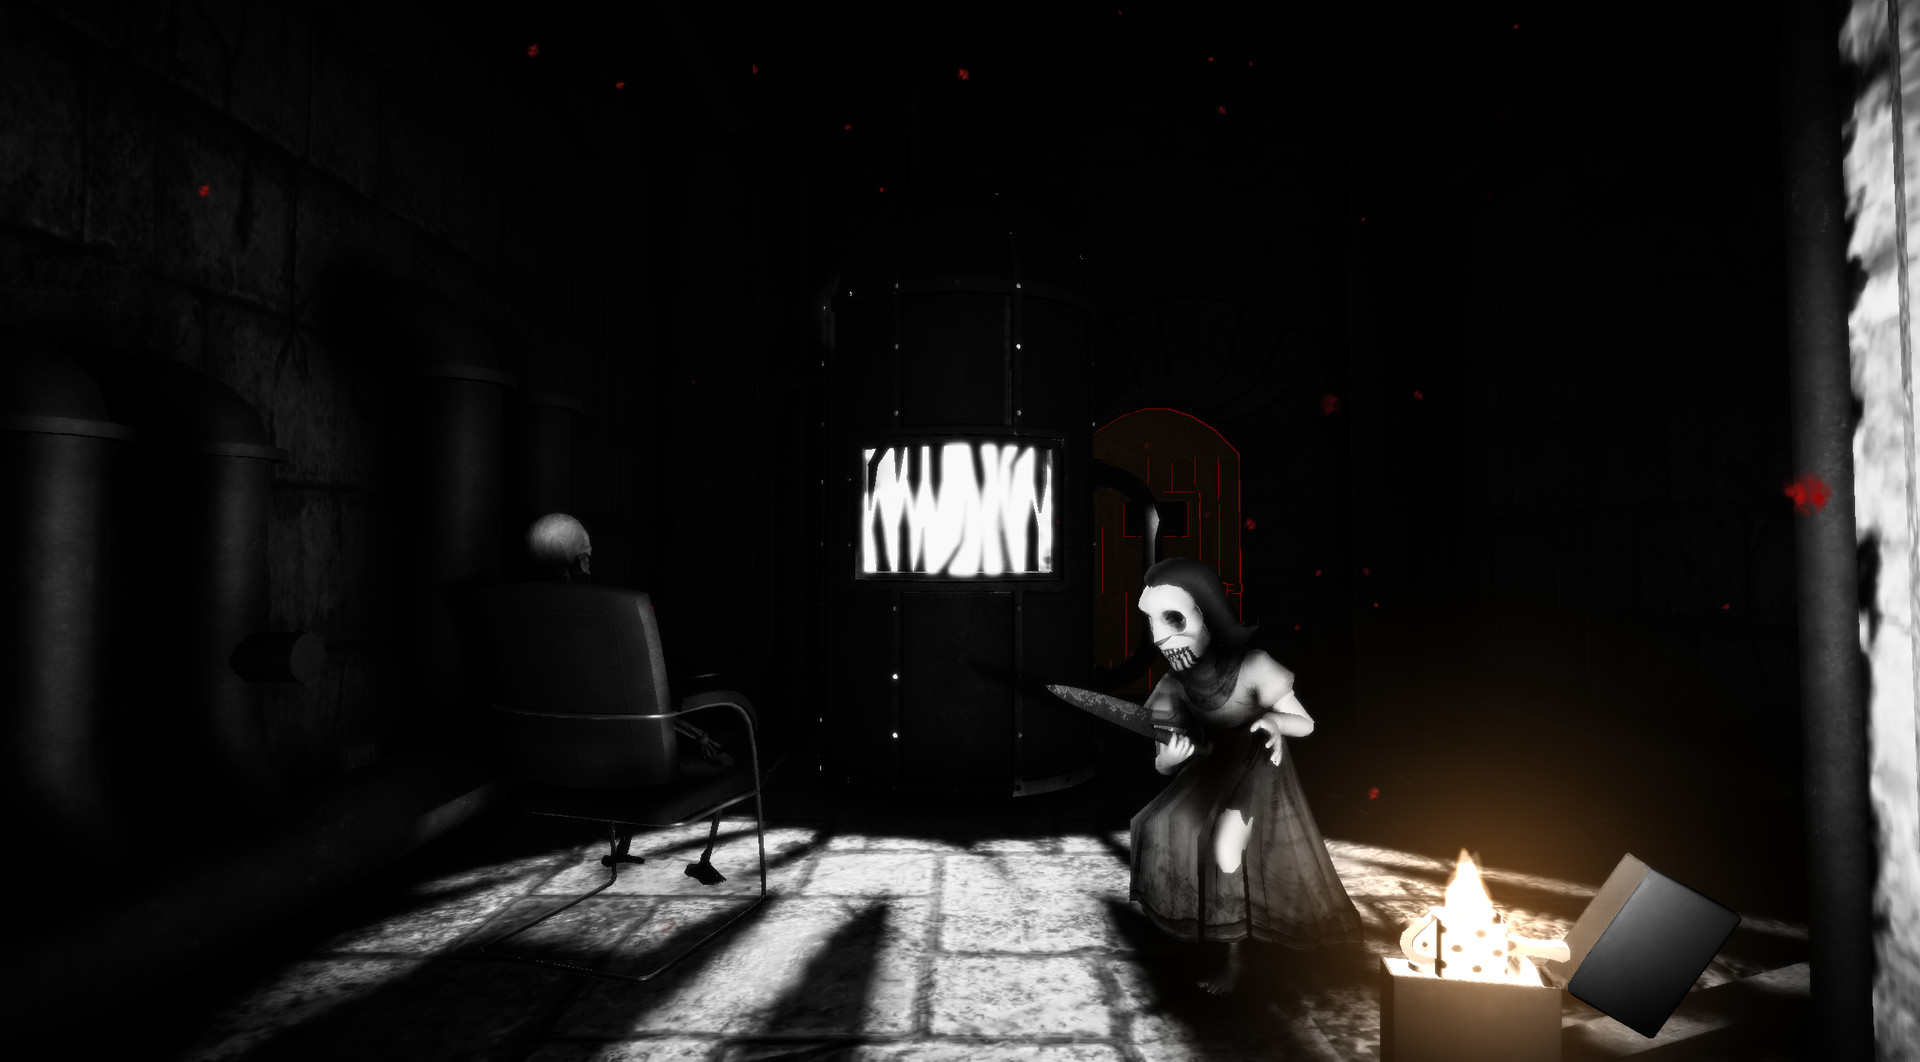 RED: Lucid Nightmare Free Download